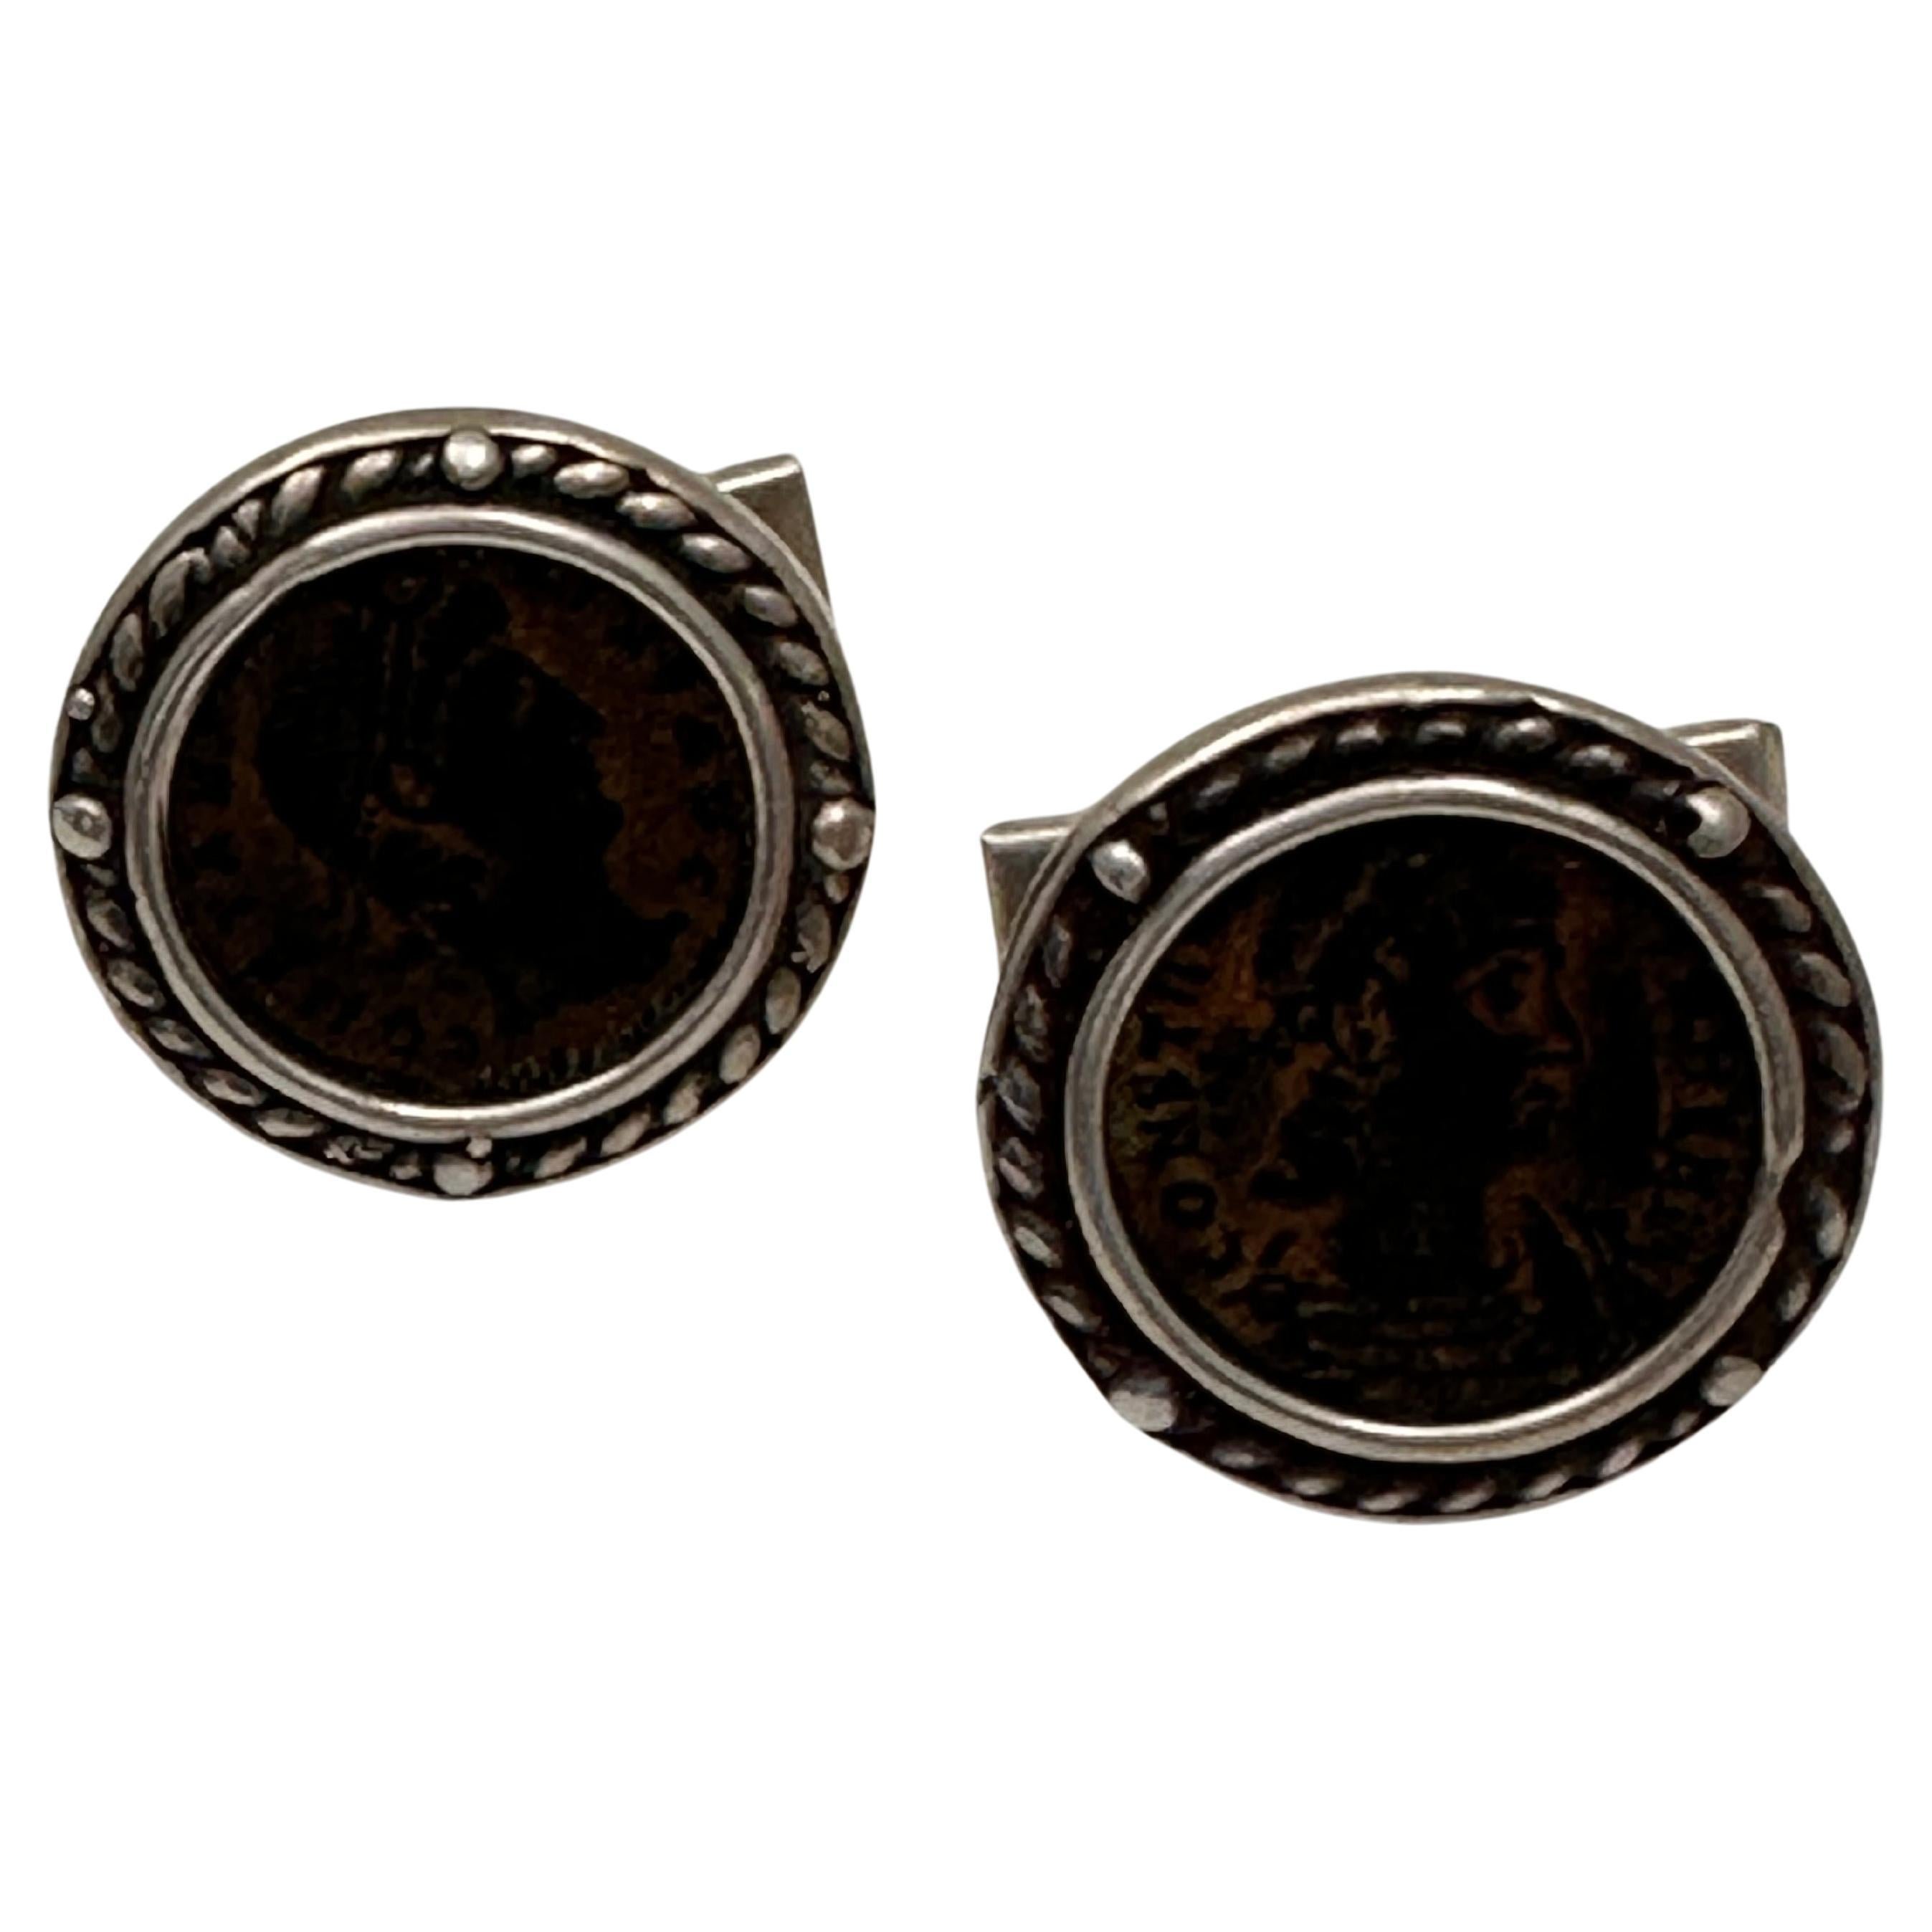 Sterling Silver .925 Constantine Coin 15mm Round Cufflinks 

THEORY OF GIVING:
Silver has been important to mankind since before the Bible was written. It was used to appease kings, emperors, and conquerors. 
Silver was used to award outstanding